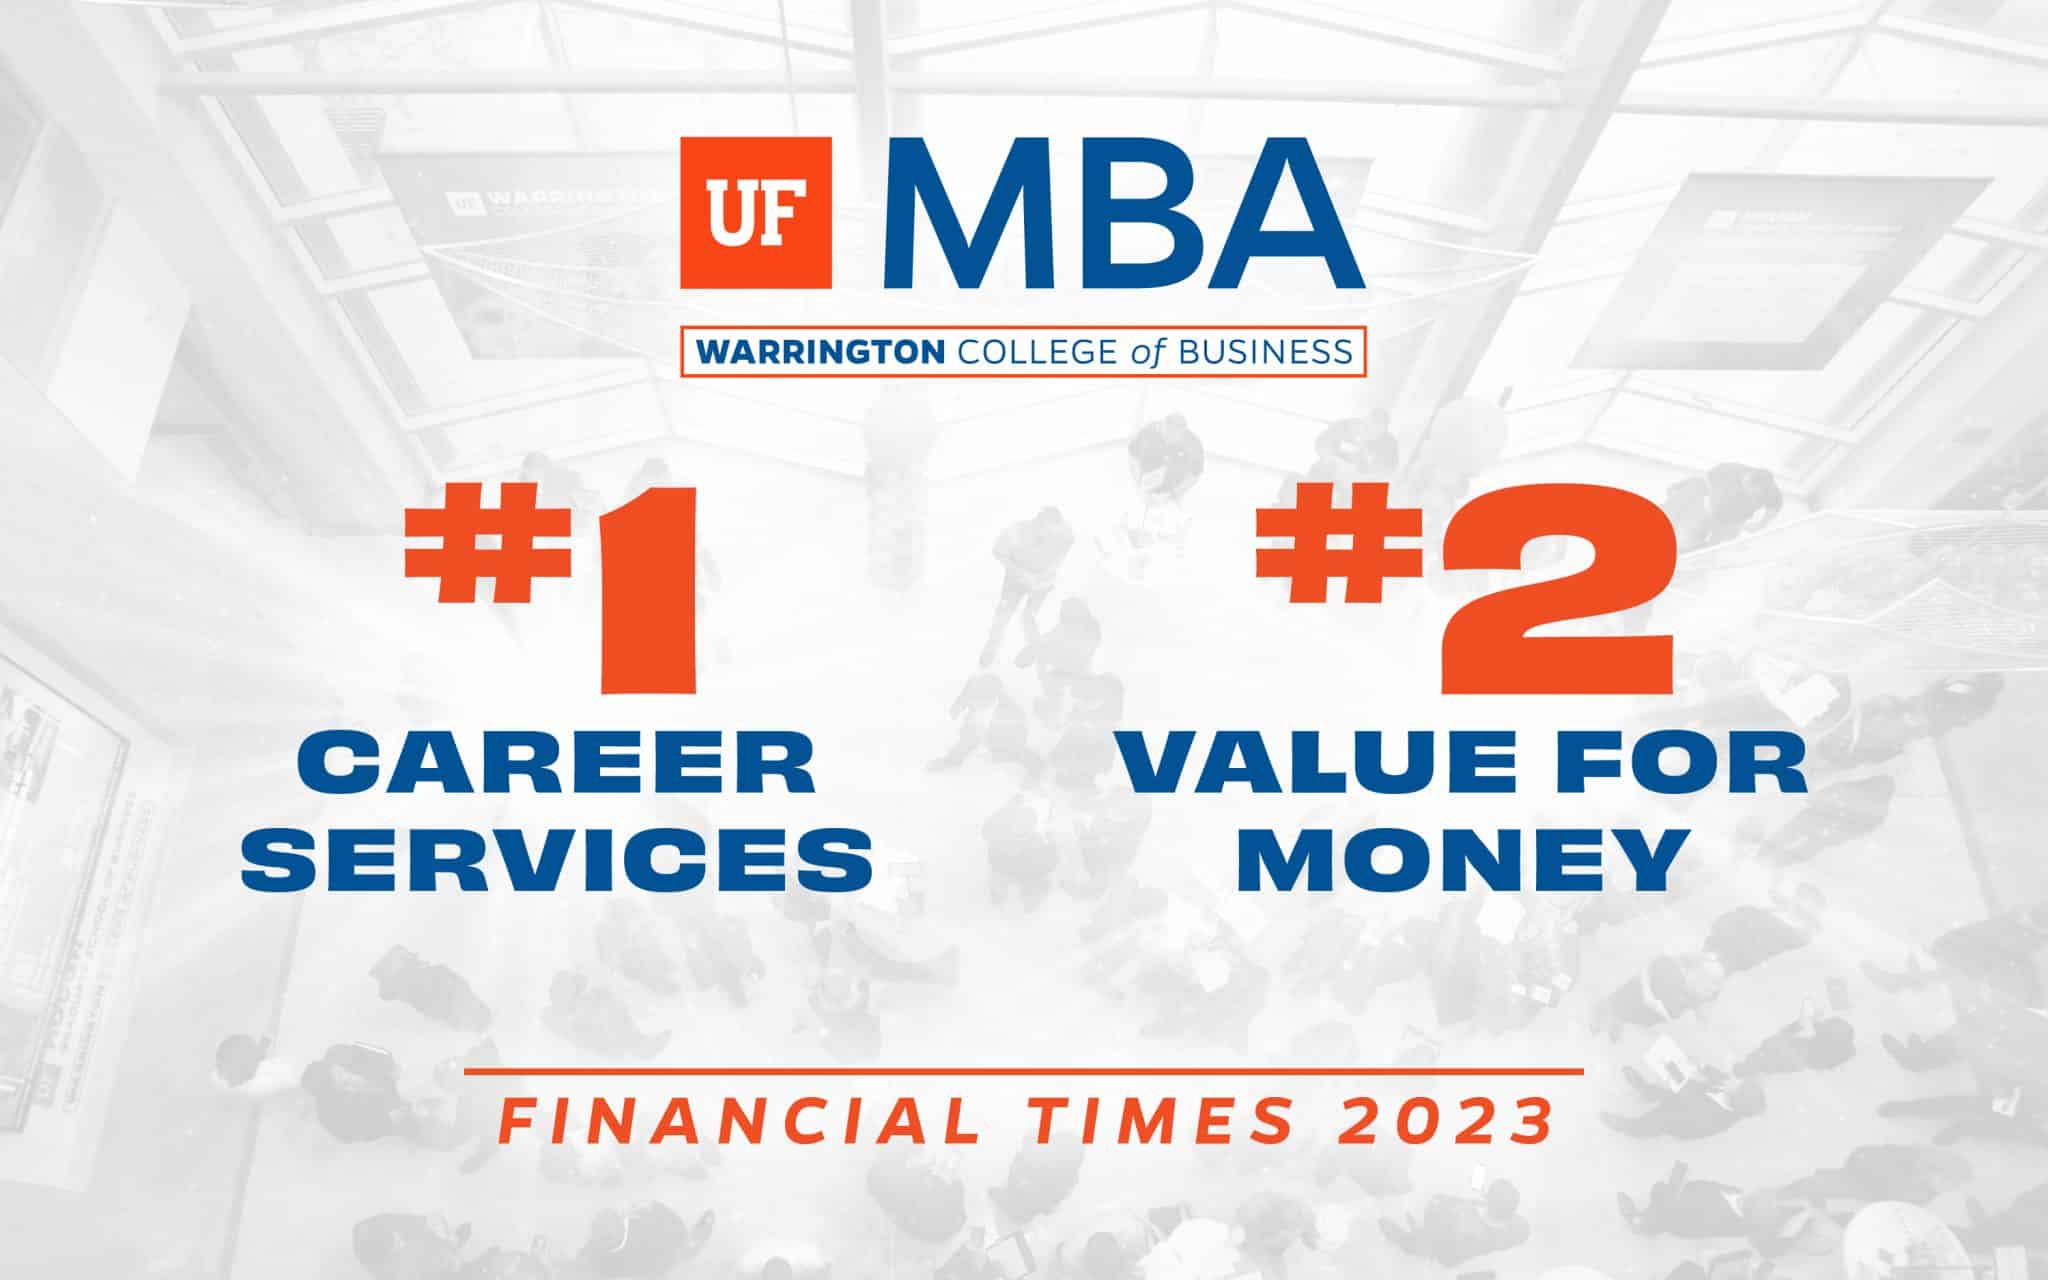 University of Florida offers best MBA for career services, value for